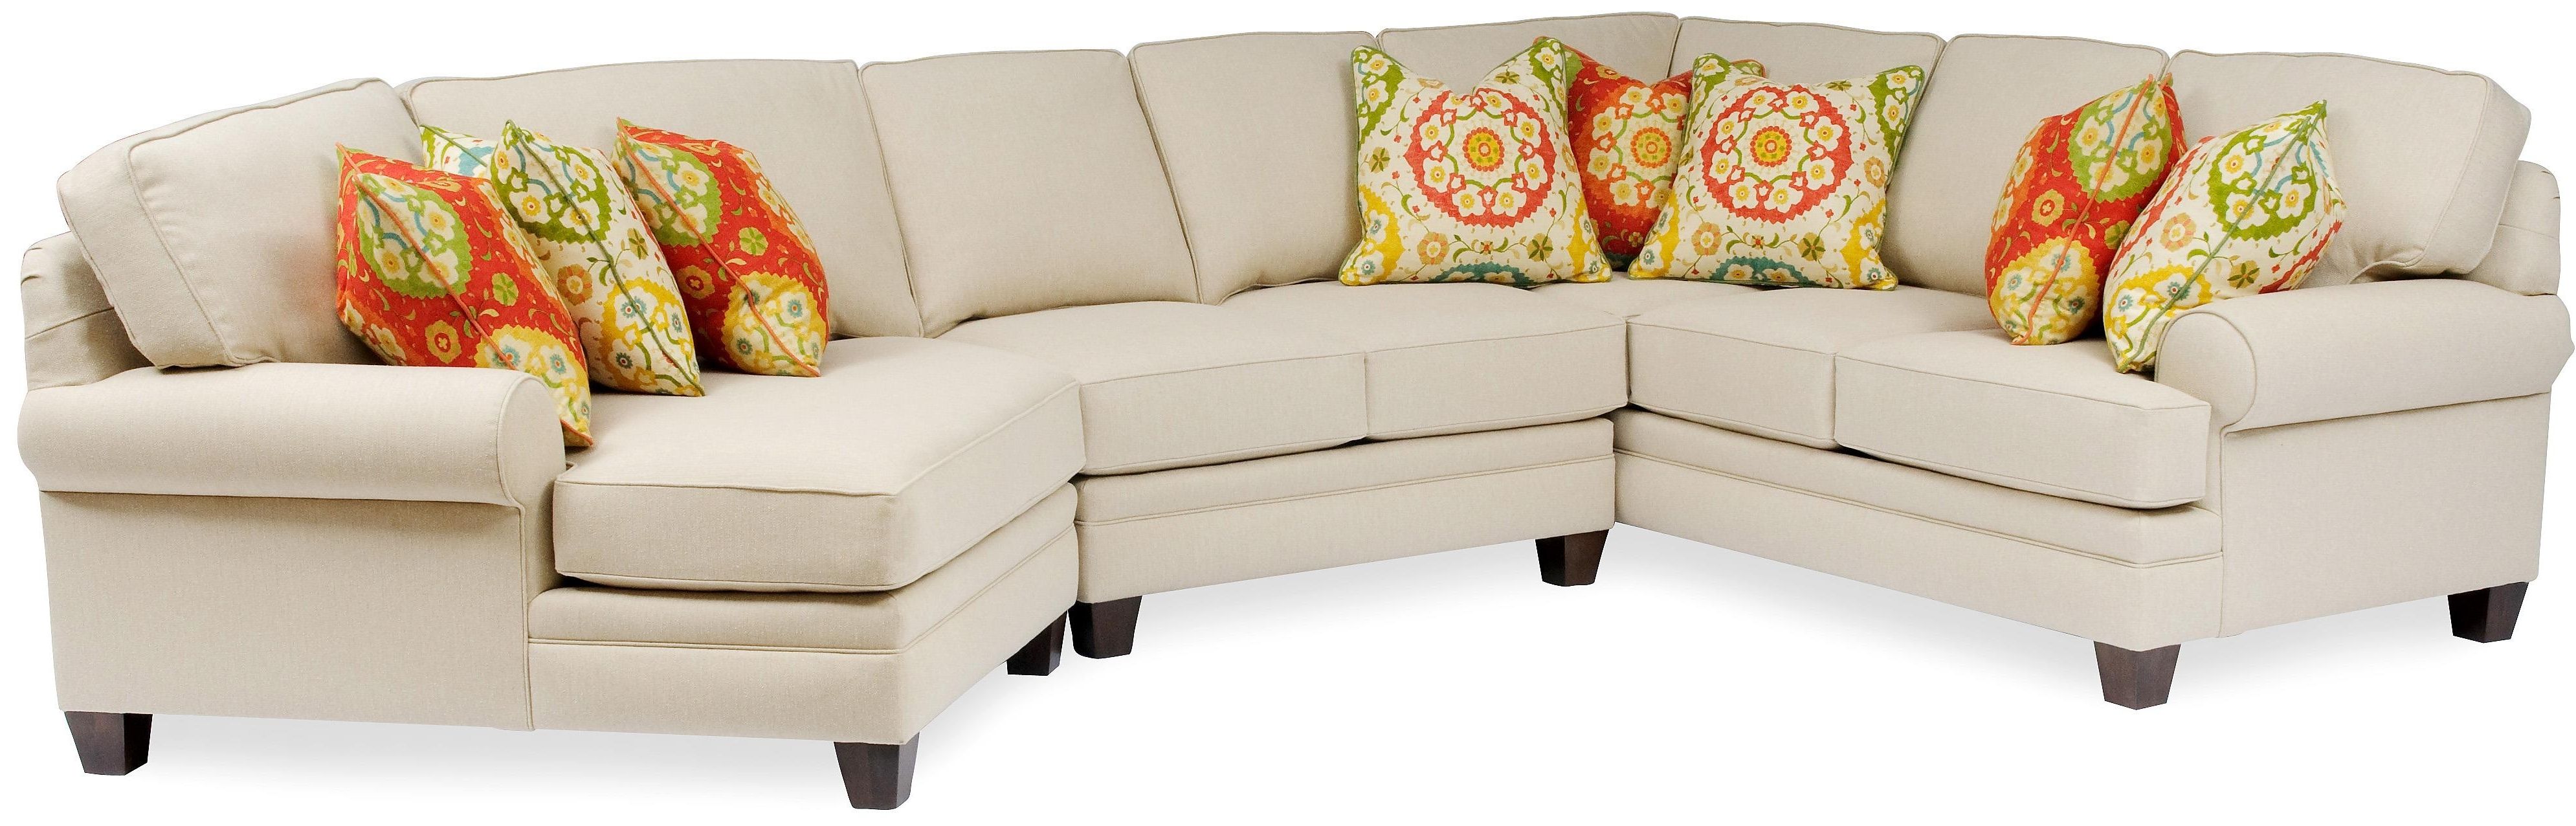 Famous 96X96 Sectional Sofas With Regard To Furniture : Sectional Sofa 96X96 Sectional Couch Costco Sectional (View 14 of 15)